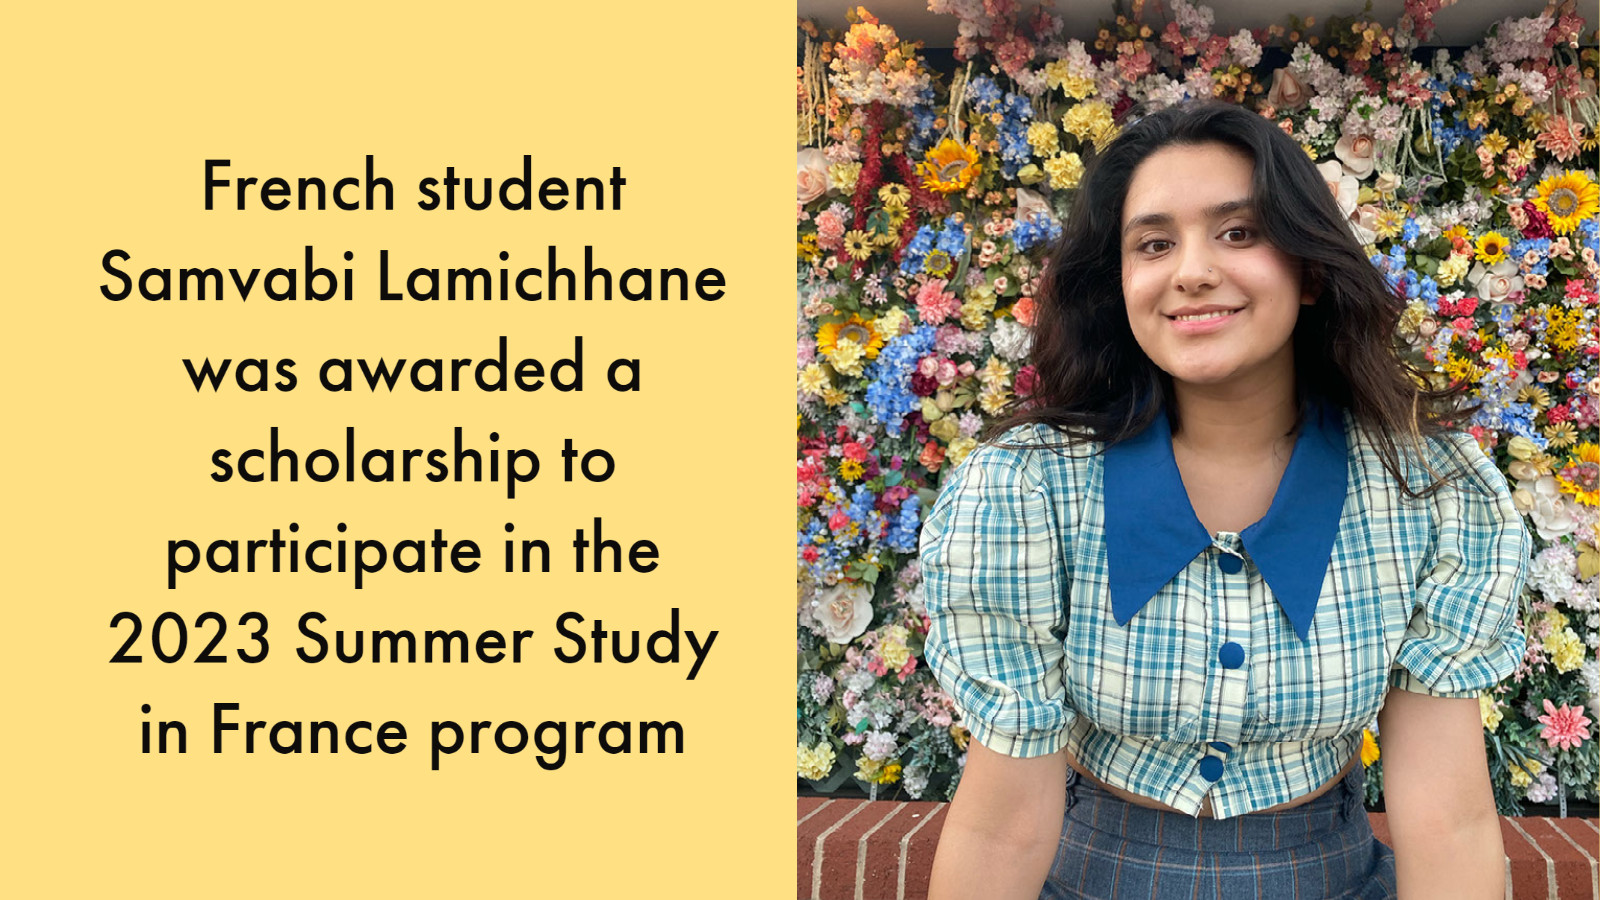 woman in front of wall of flowers, text: French student Samvabi Lamichhane was awarded a diversity scholarship to participate in the 2023 Summer Study in France program